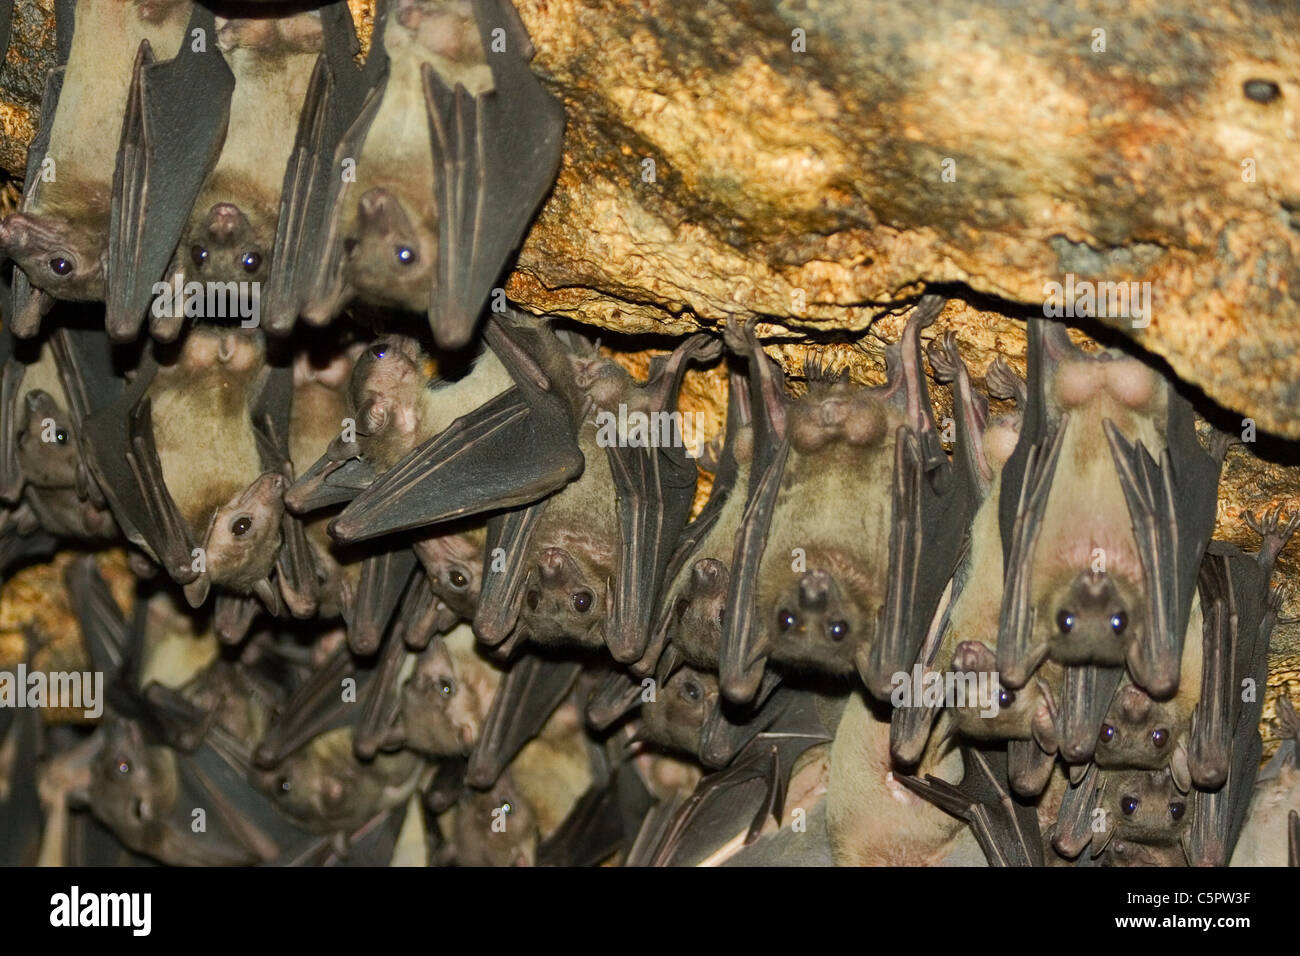 Bats in a cave, Maramagambo Forest, Queen Elizabeth National Park, Uganda, Africa Stock Photo